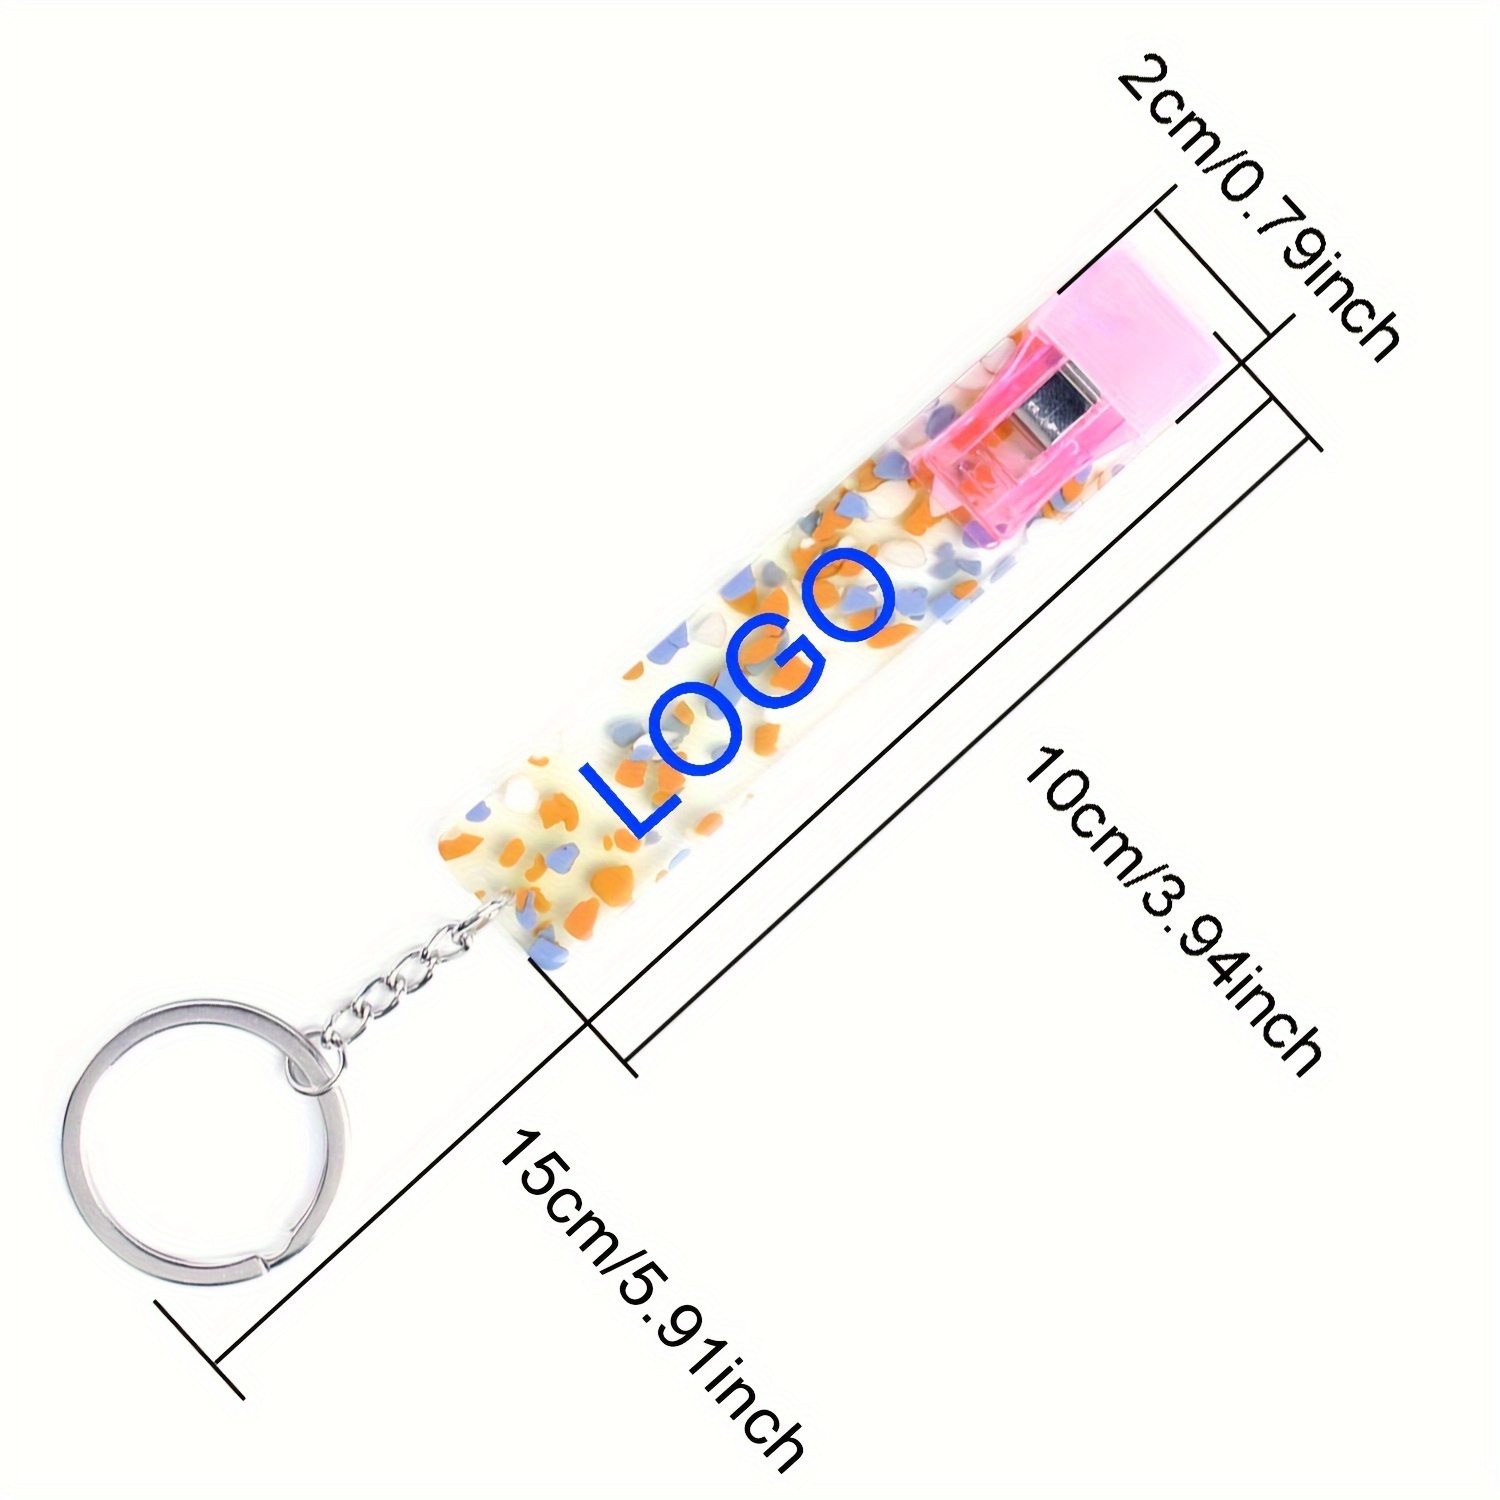 PangiFen 4pcs Card Grabber for Long Nails Keychain ATM Card